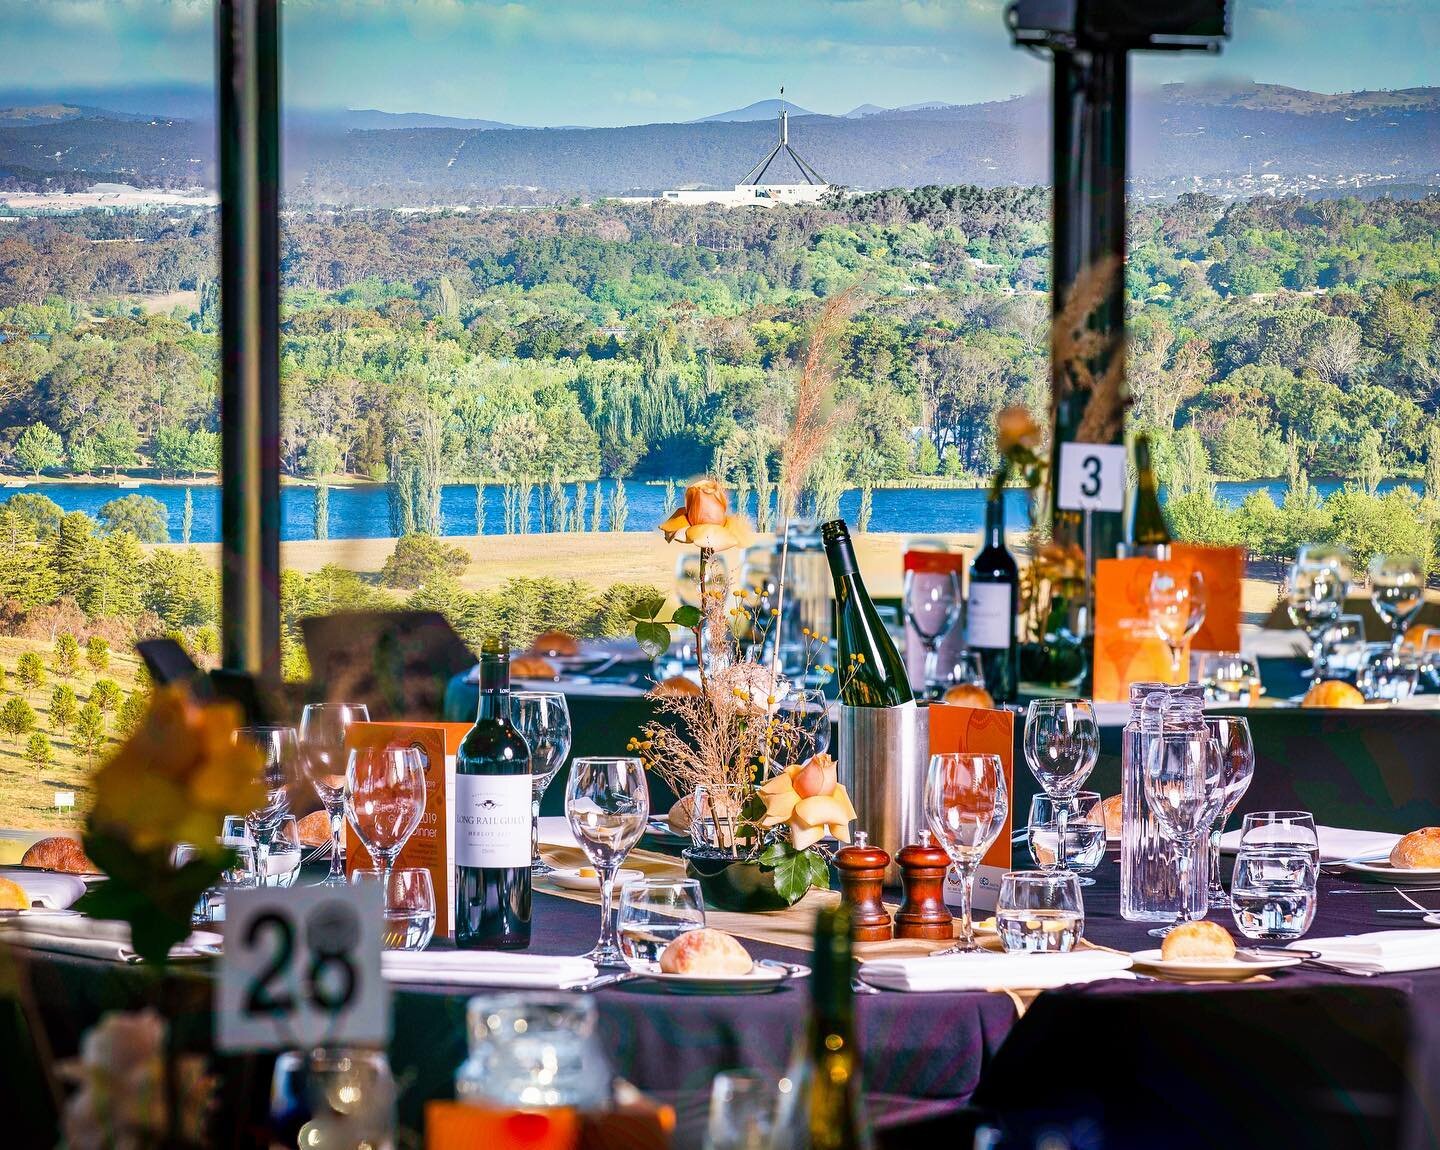 A Canberra Conference Dinner with a view! 

#professionalphotographer&nbsp;#conferences&nbsp;#eventphotography&nbsp;#conferencedinner #photographeratlarge #events #corporateevents #canberra
.
.
.
.
.
.
#brisaneevents #canberraevents&nbsp;#eventprofsa